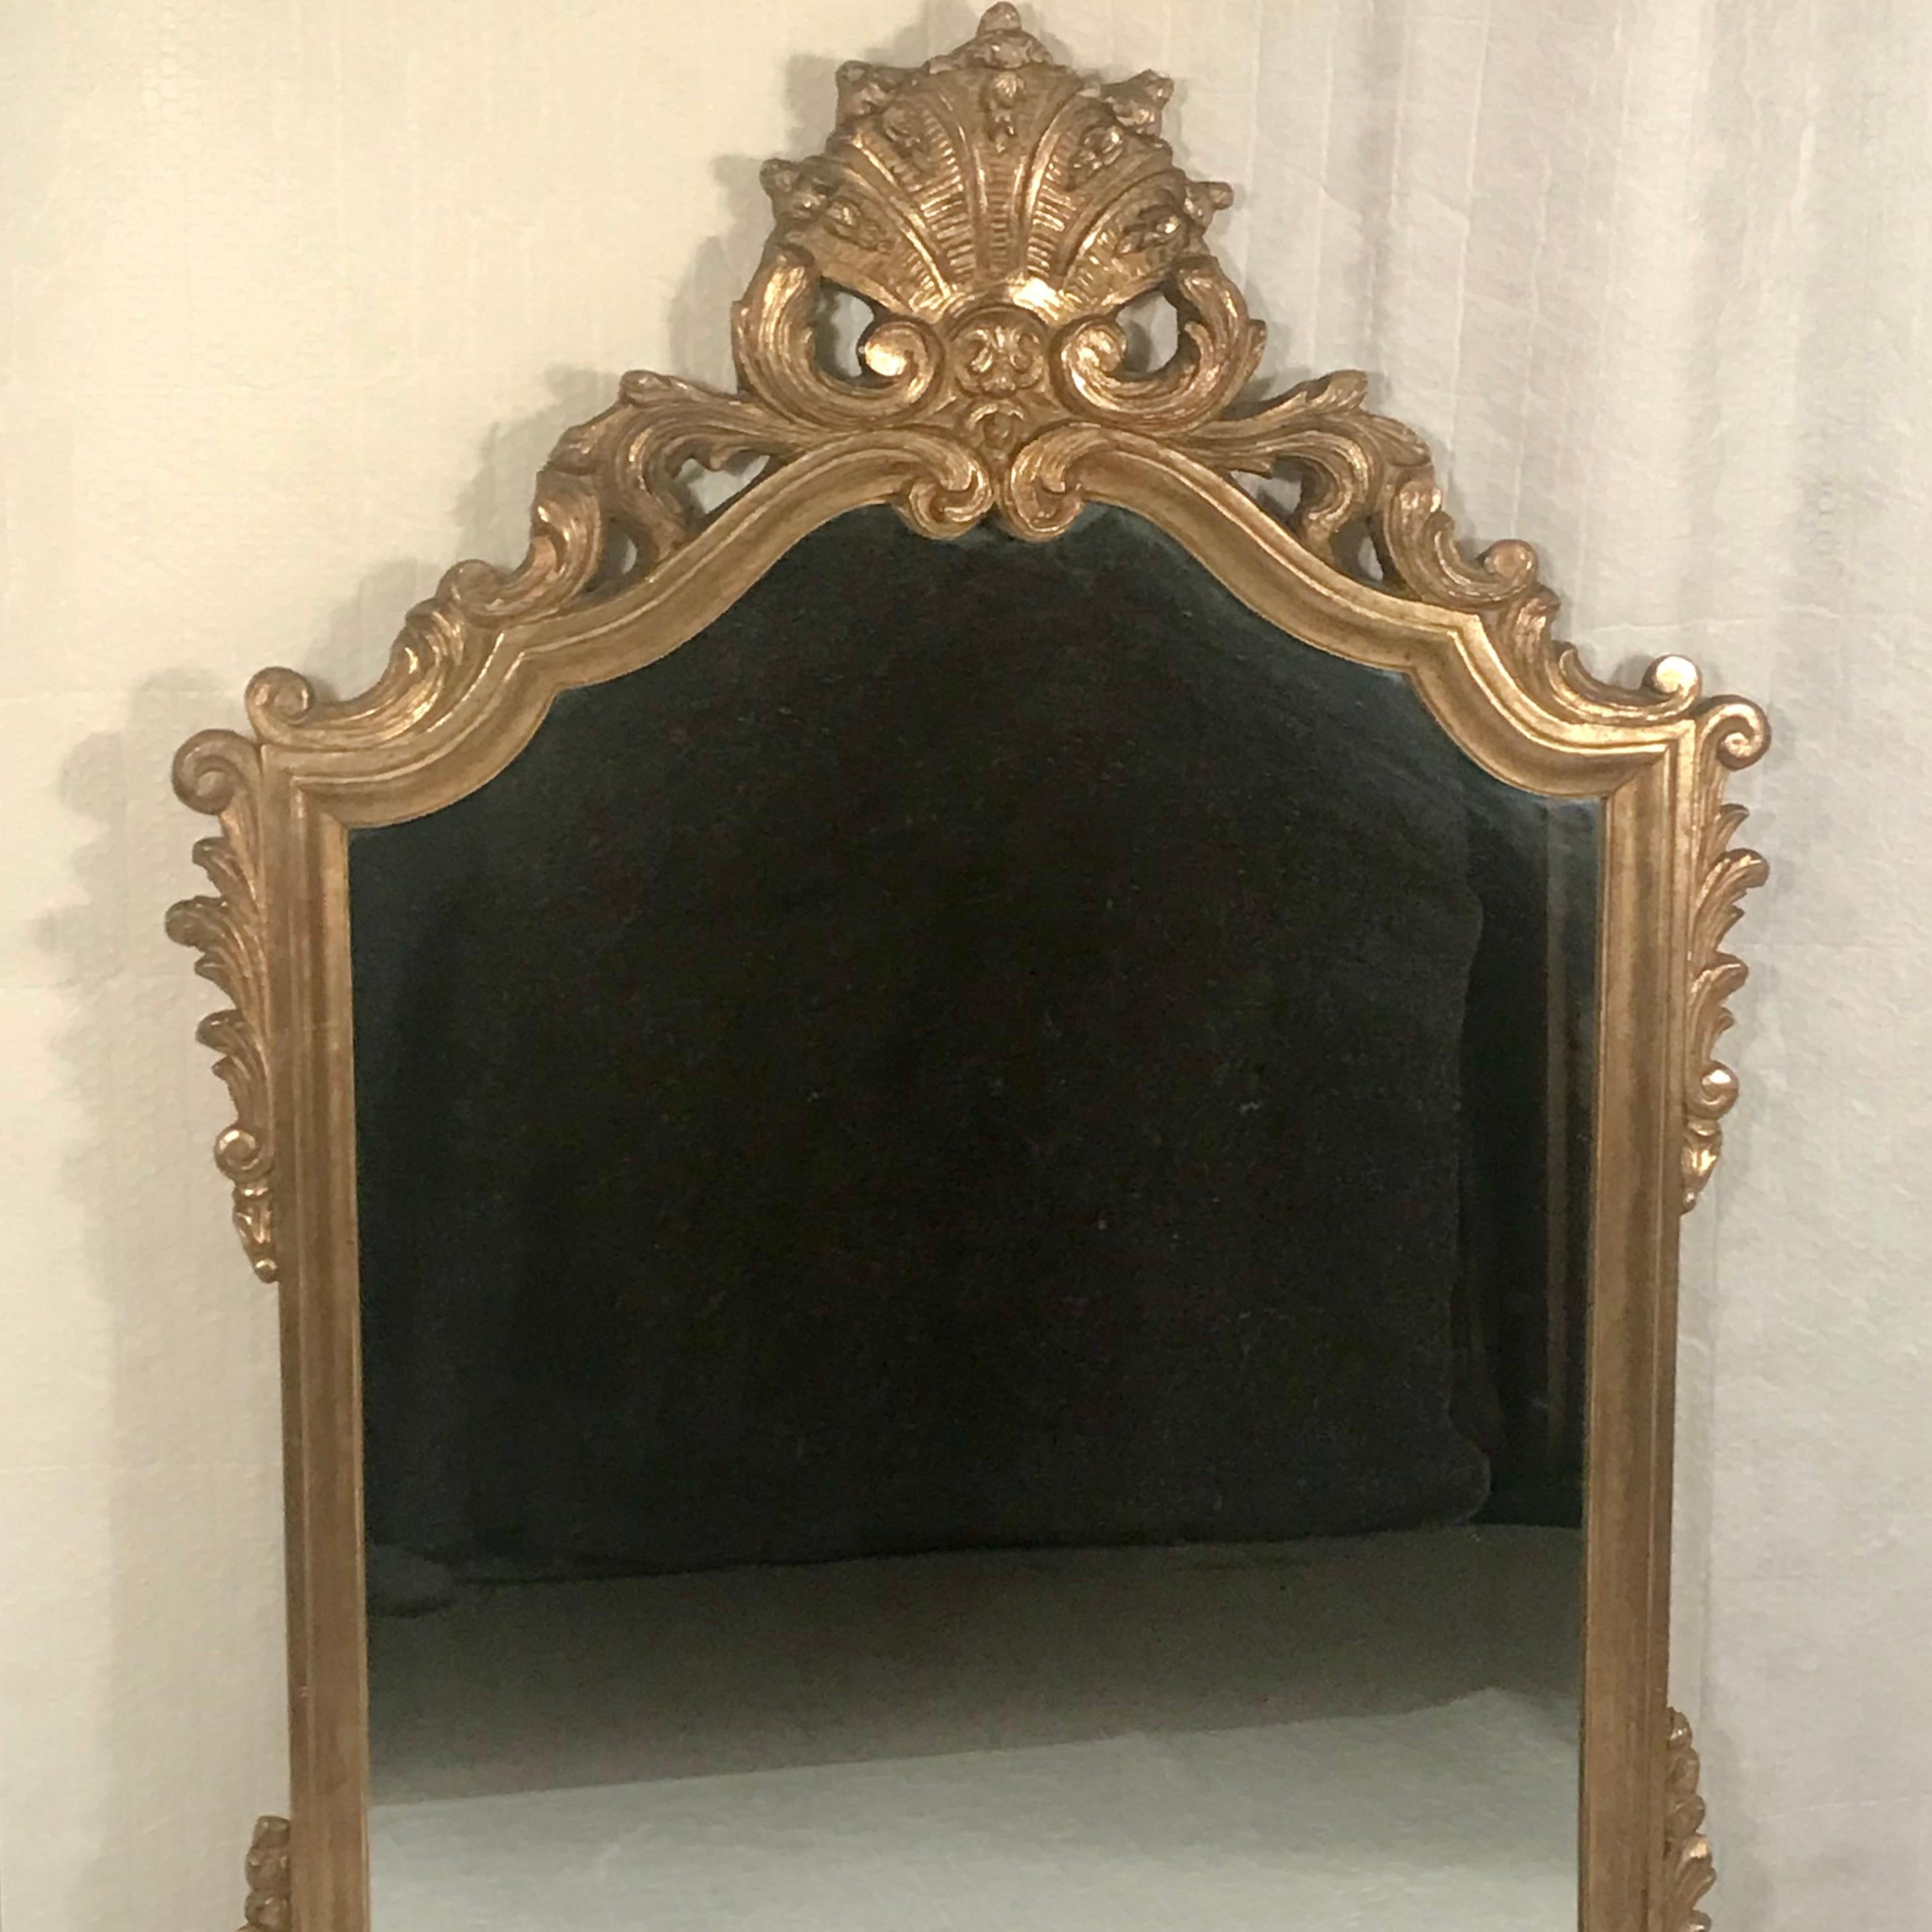 Transform your living space with our stunning Baroque Style Wall Mirror, boasting a luxurious gilt wood frame that exudes opulence and sophistication. Adorned with a striking sea shell motif complemented by ornate acanthus leaves and delicate volute